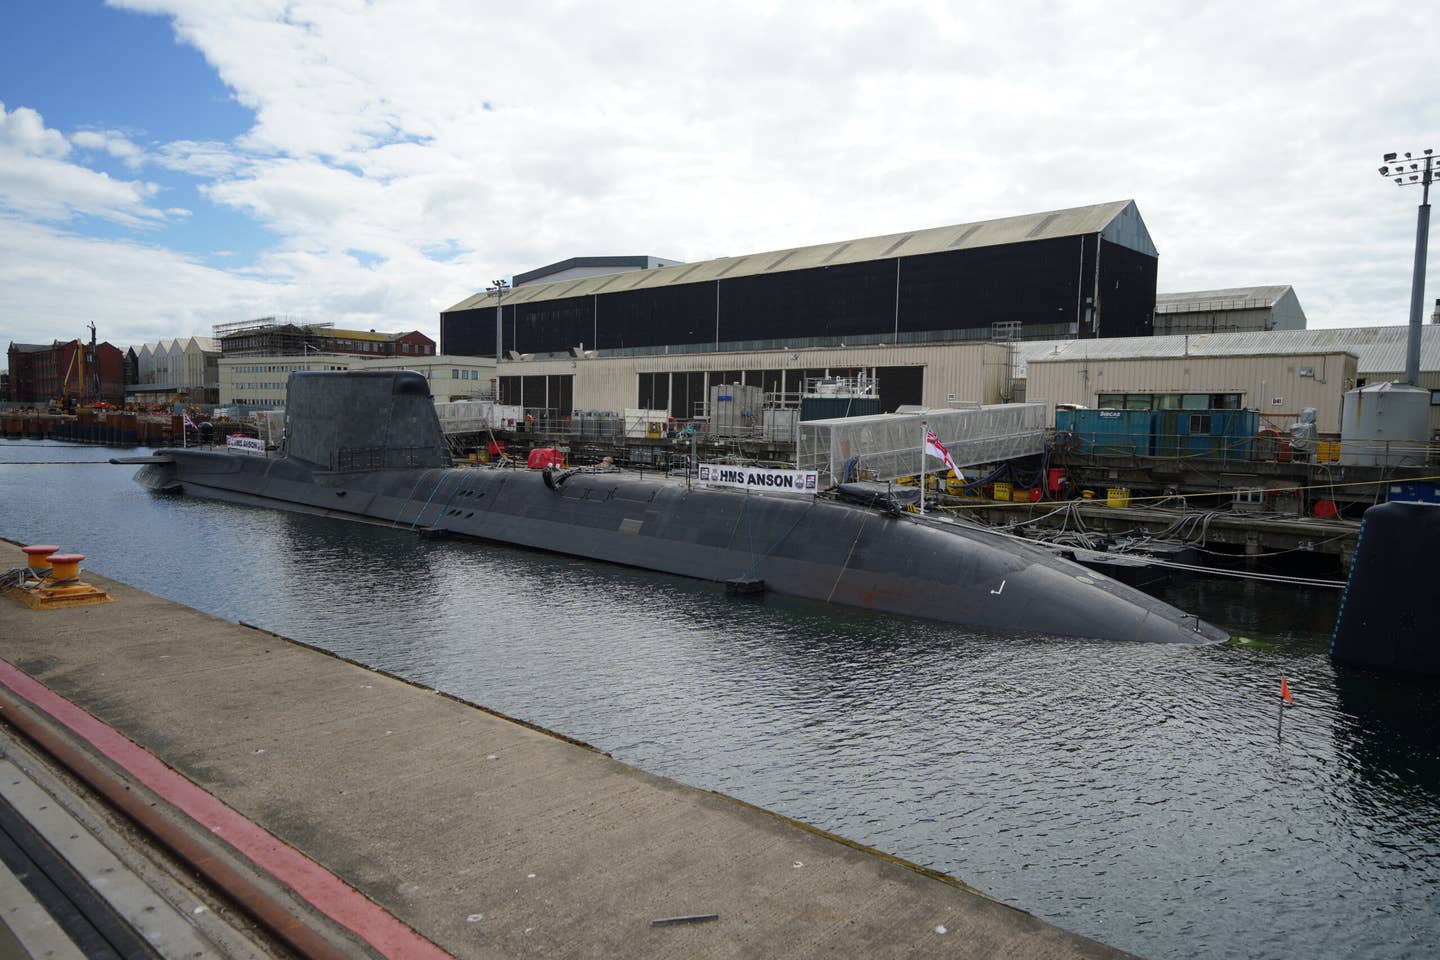 <em>HMS Anson</em> docked at BAE systems in Barrow-in-Furness before it is officially commissioned into the Royal Navy, as the U.K.'s newest <em>Astute</em> class attack submarine. (Photo by Peter Byrne/PA Images via Getty Images)